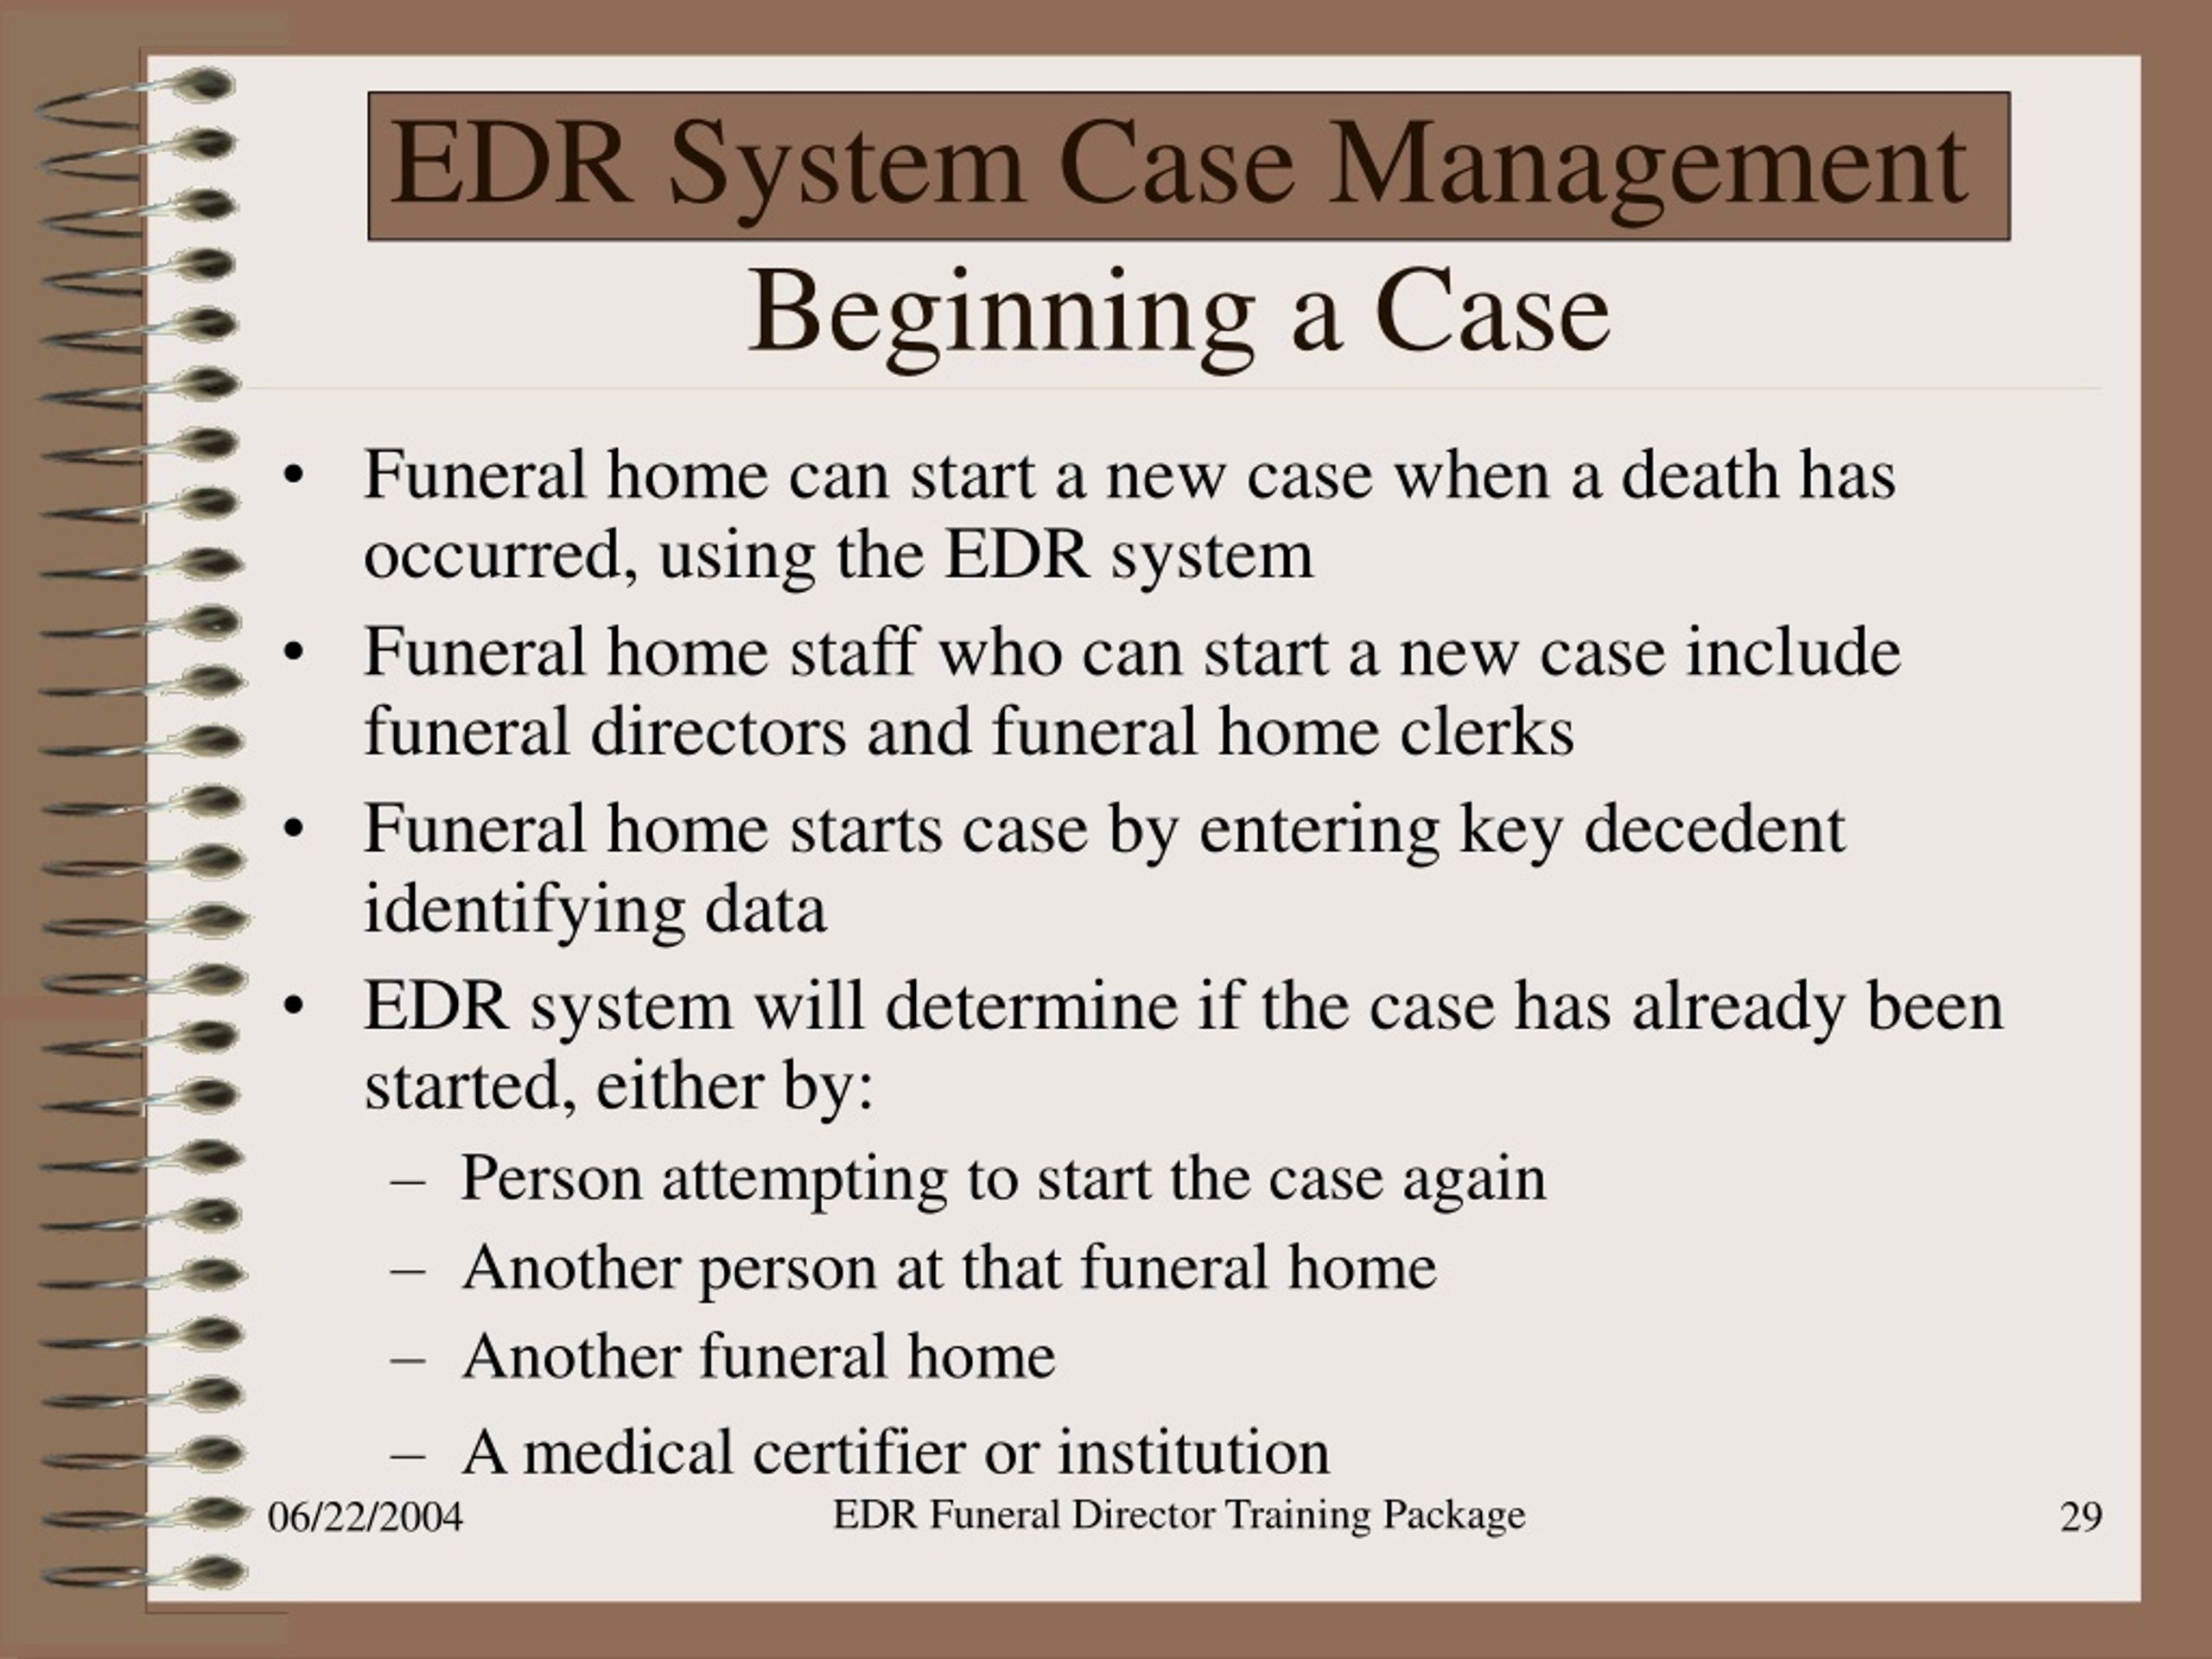 EDRS Help - Funeral Home Users